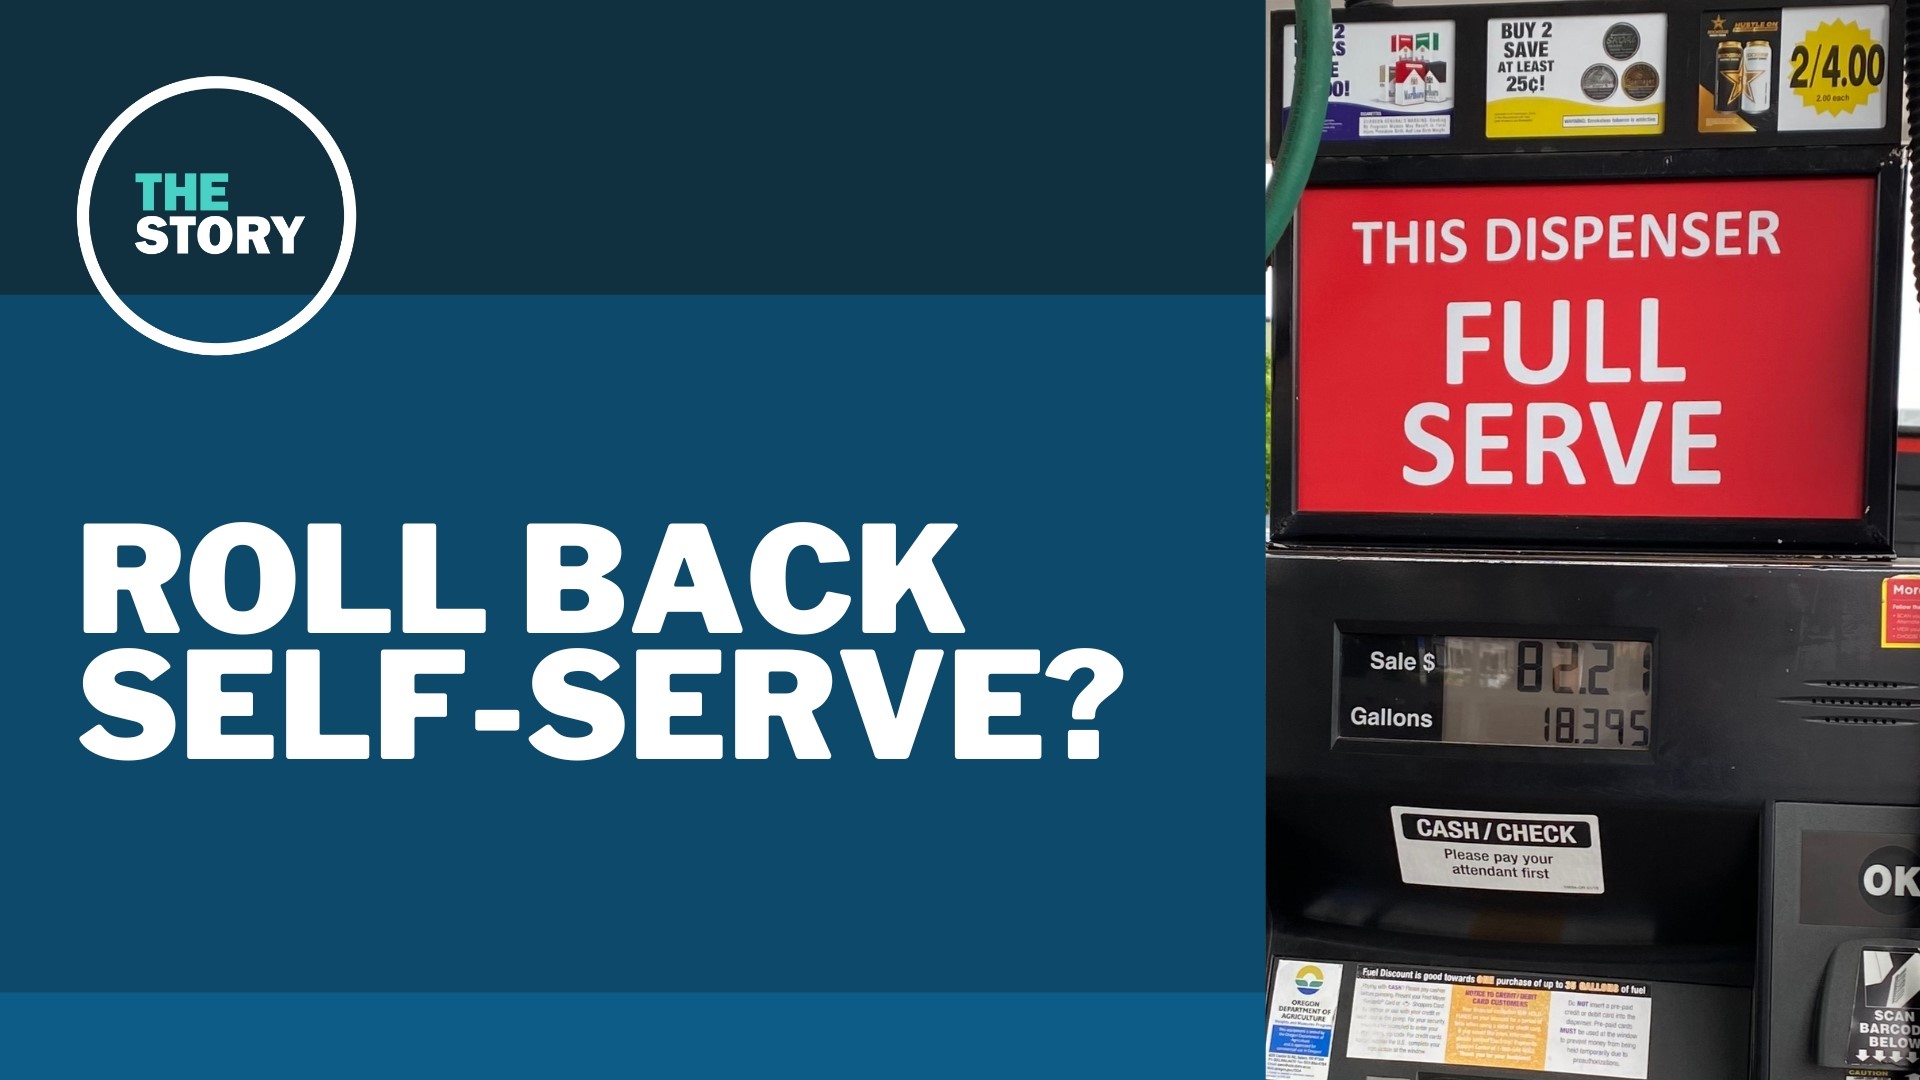 Oregon was one of two states that banned self-serve gas until the legislature changed the policy earlier this year. UFCW Local 555 wants to undo that decision.